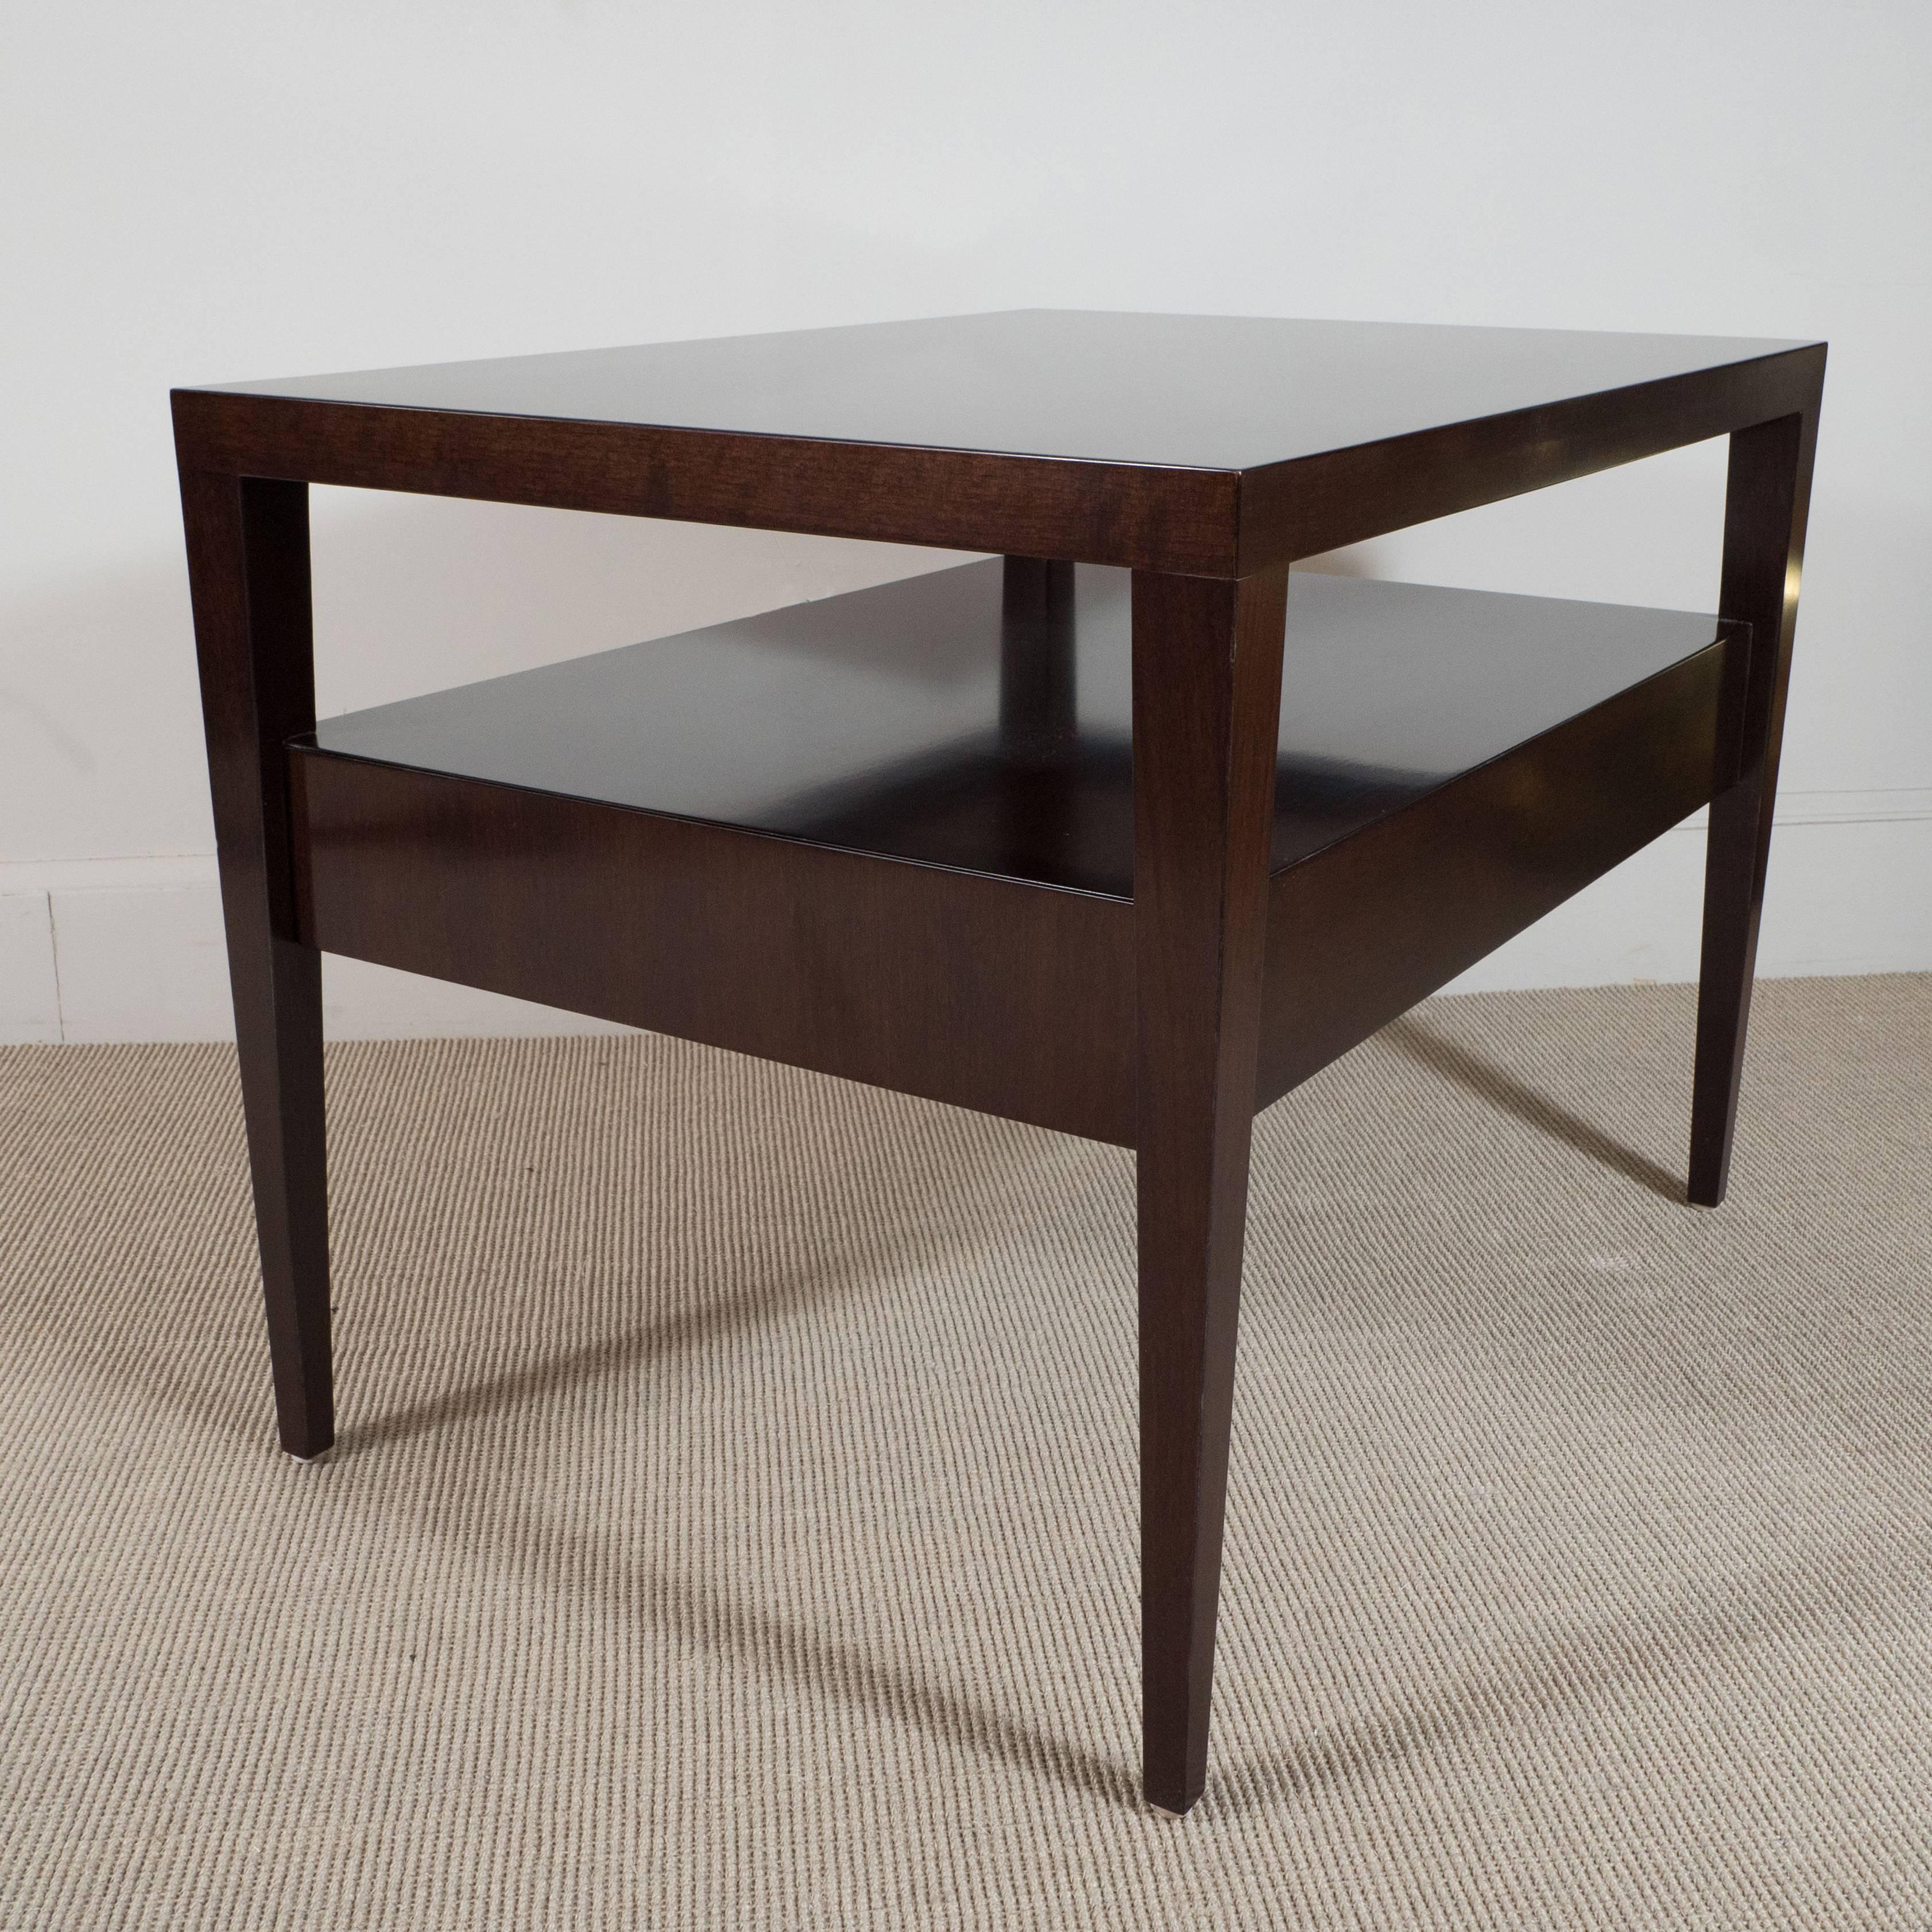 Contemporary Pair of Two-Tiered Rectangular Wooden End Tables with drawer, 1950s style